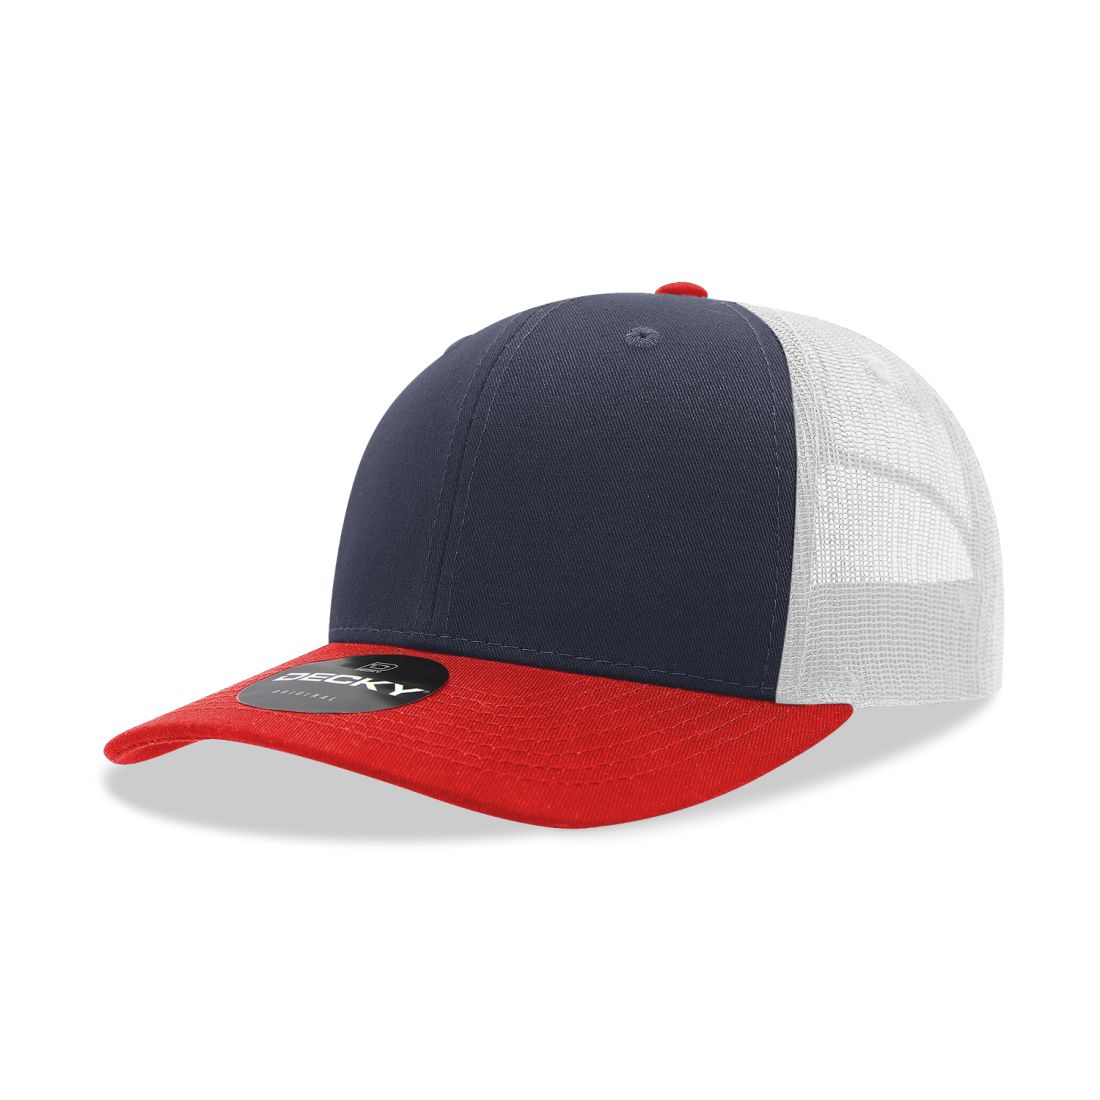 Red/Navy/White color variant